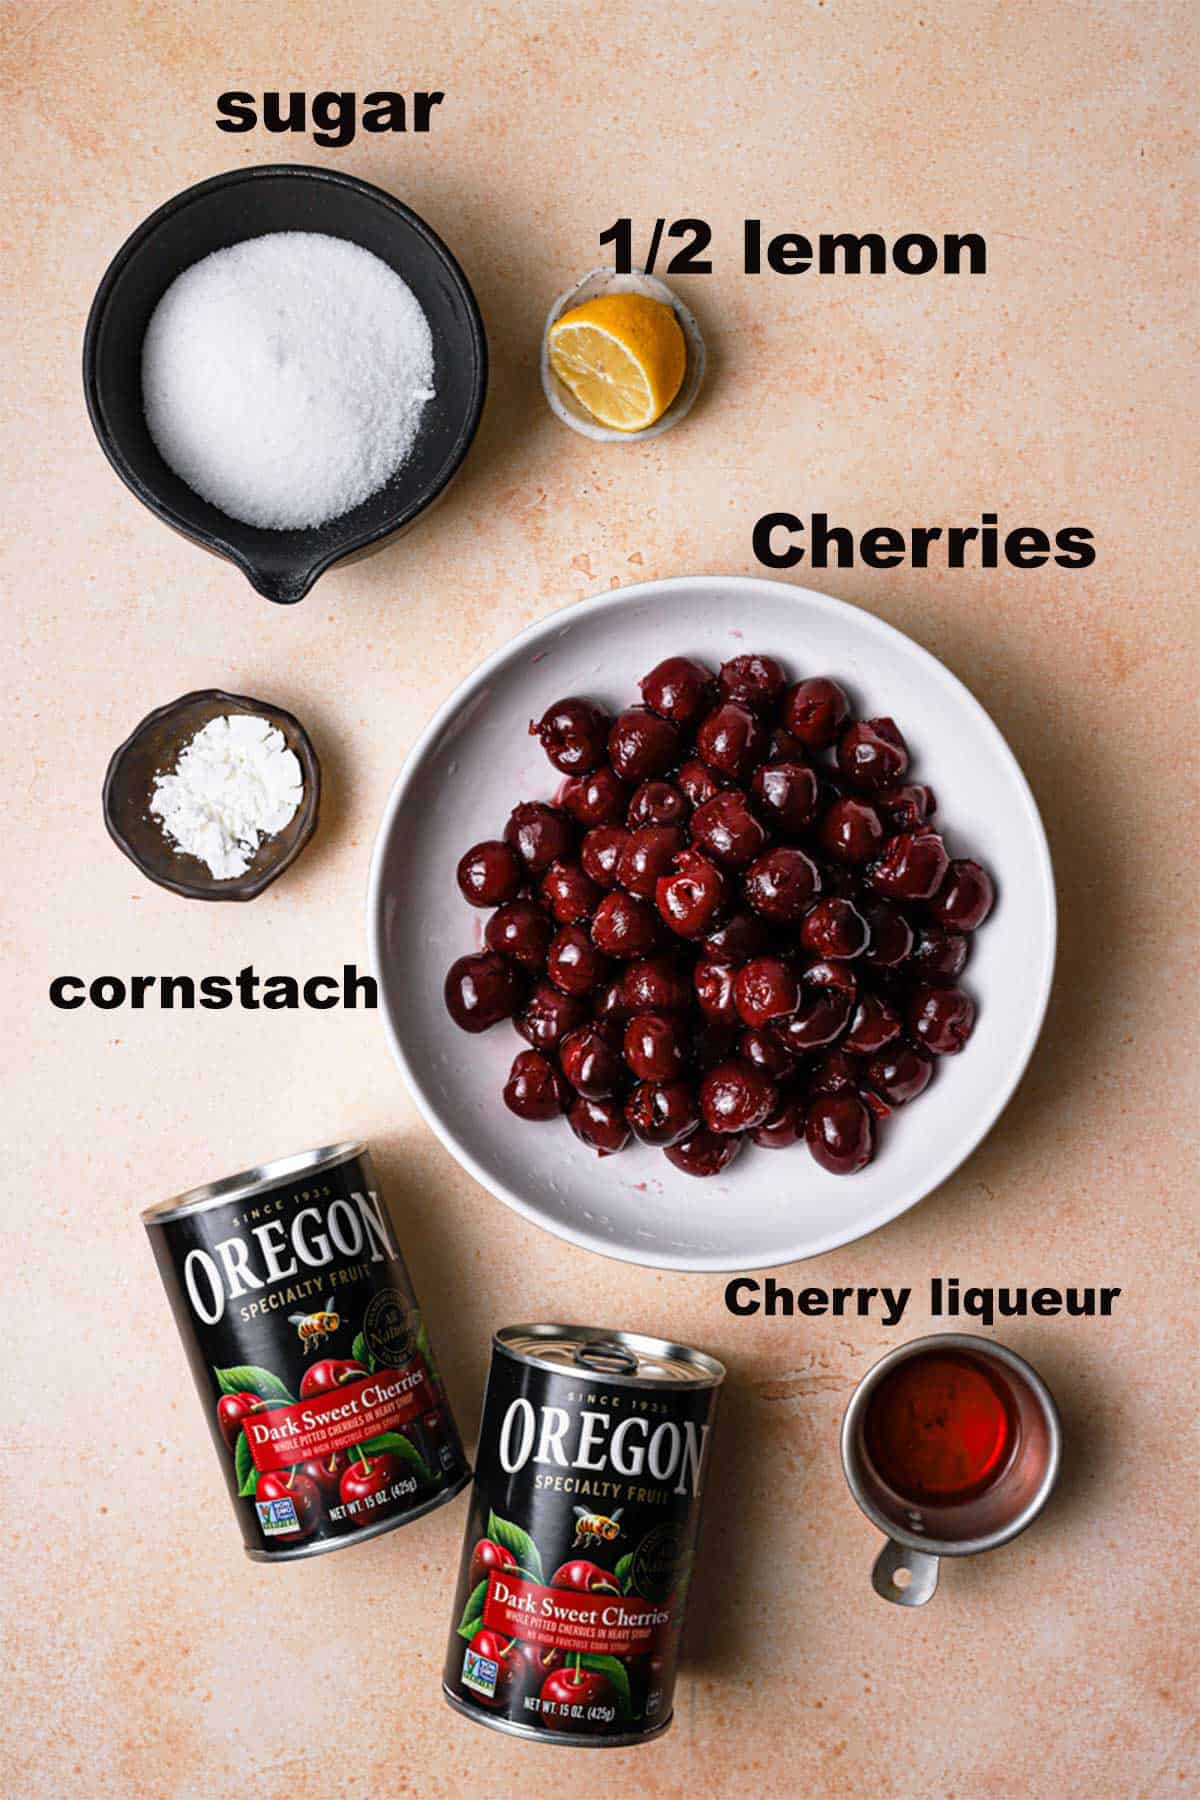 Ingredients list to make cheery filling for : pitted cherries, cornstarch, lemon juice, sugar and cherry liqueur